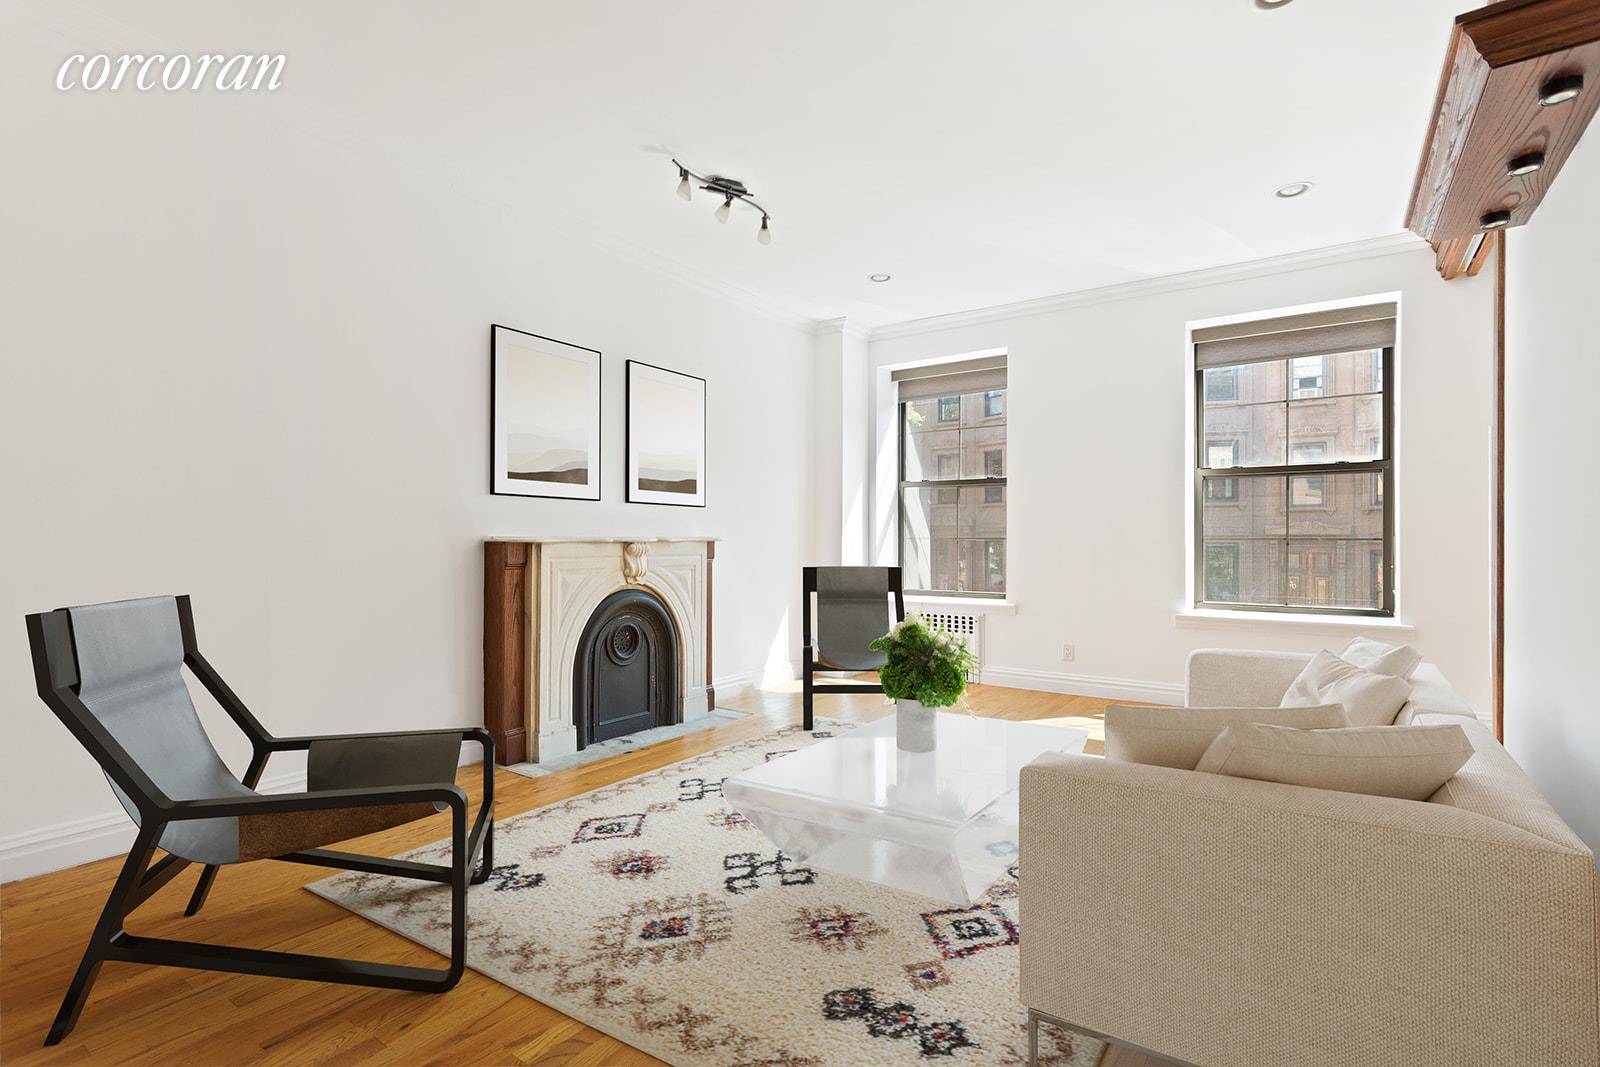 NEW in Park Slope ! In a 22 foot wide 4 story townhouse, this two bed, two bath condo plus home office is a great find.